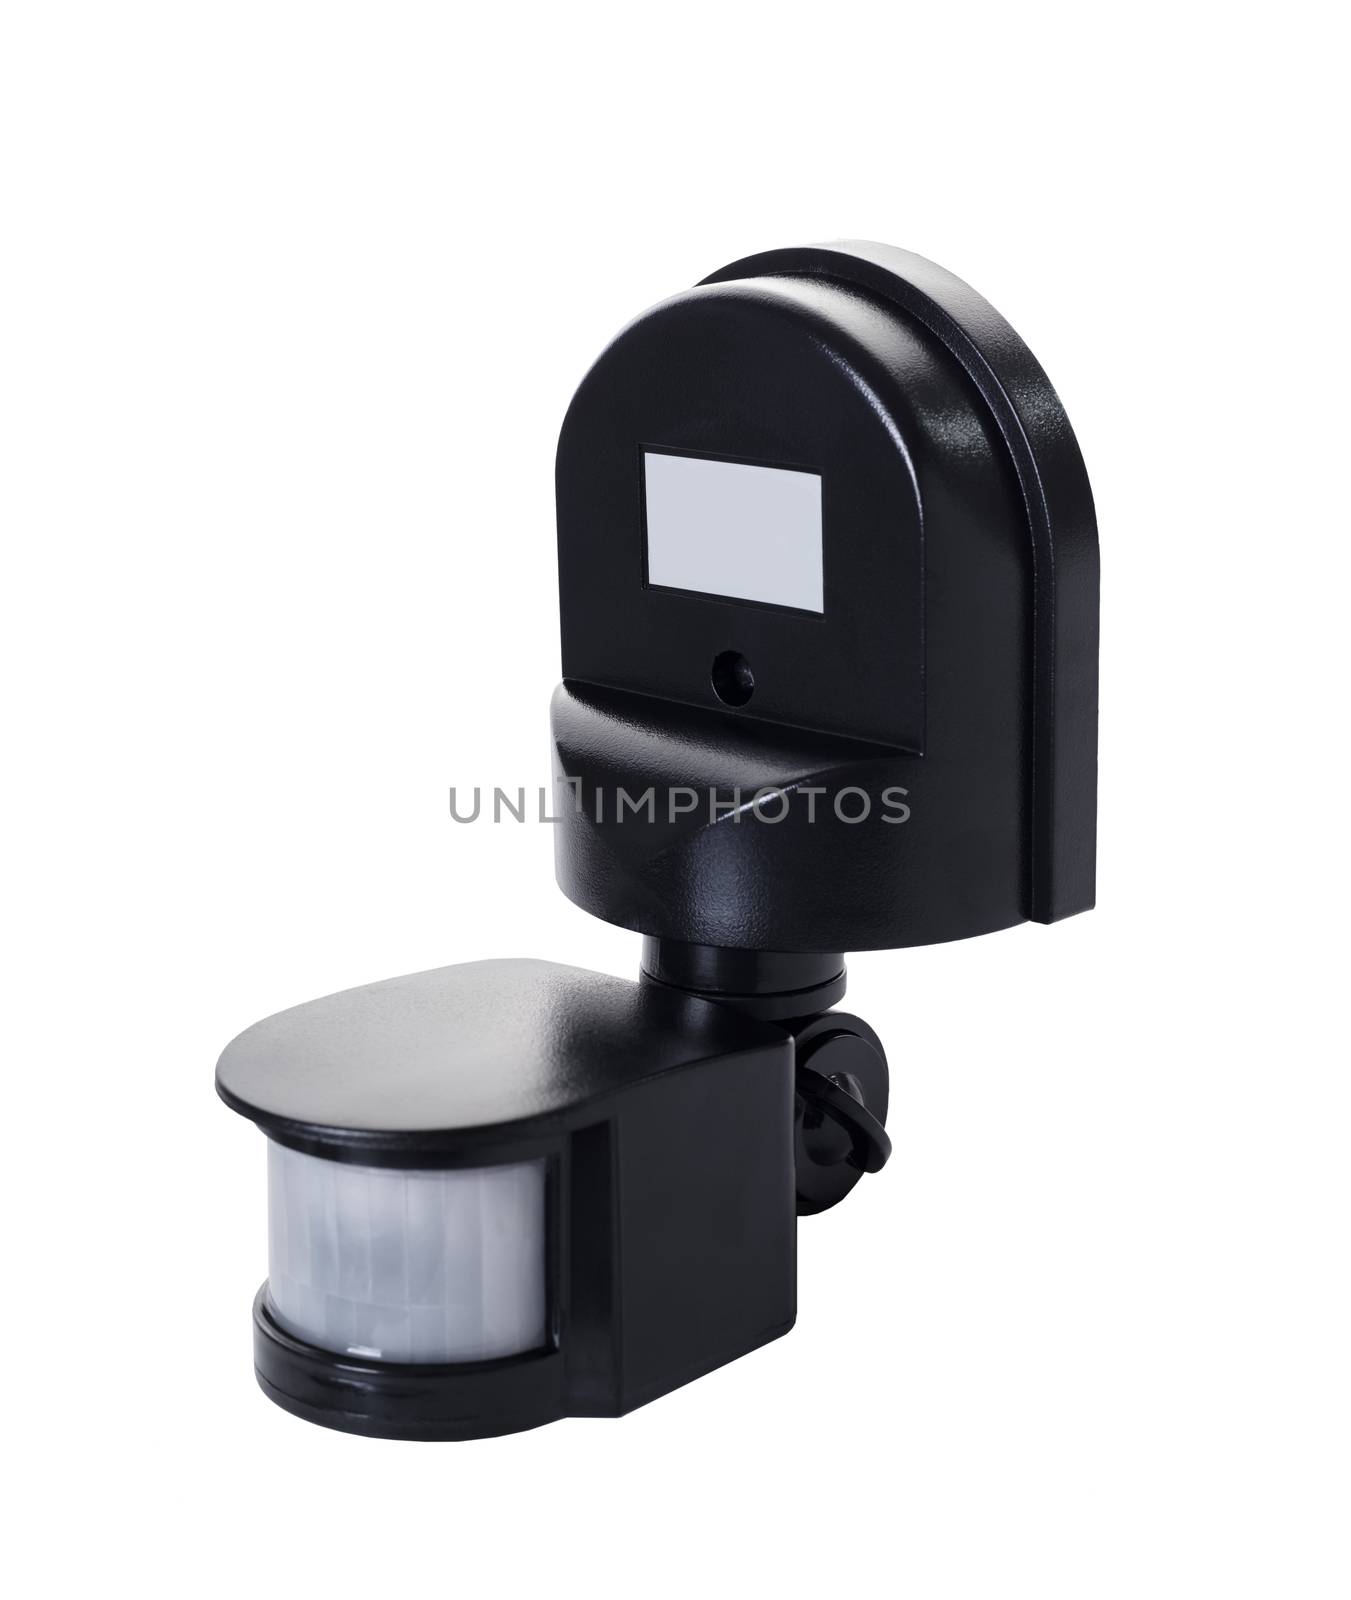 new motion detector on white isolated background